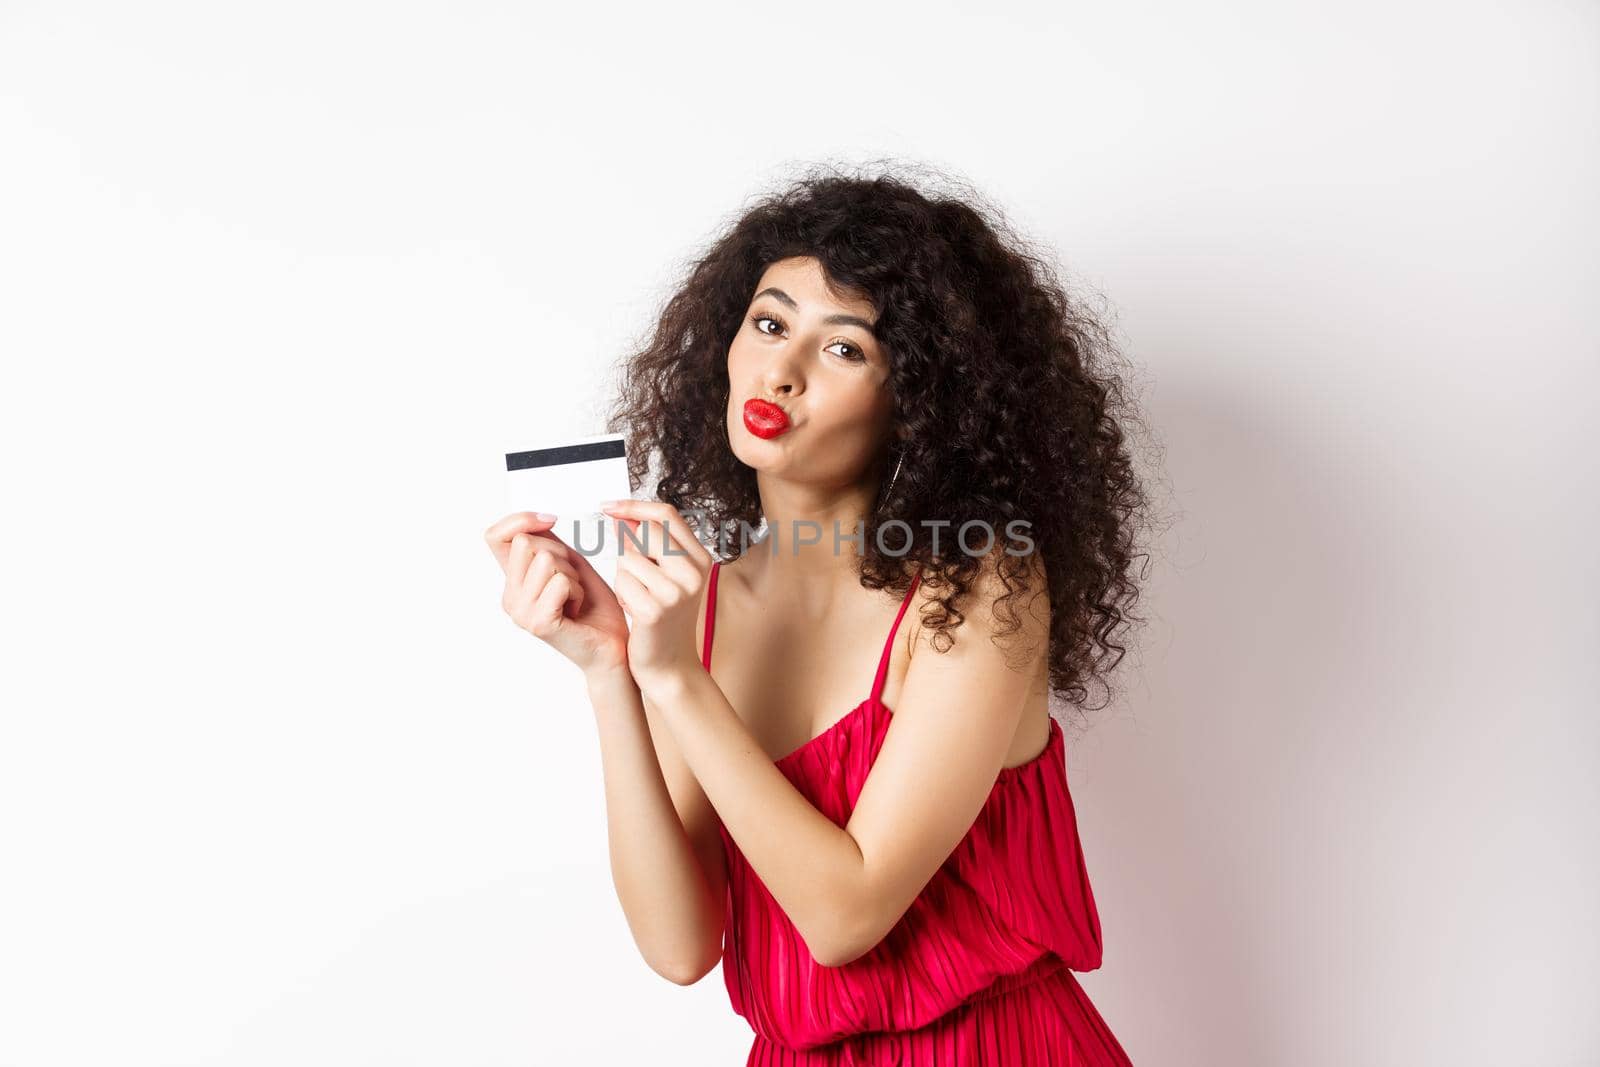 Shopping. Beautiful lady with curly hair, pucker lips, kissing plastic credit card, standing in red dress against white background.